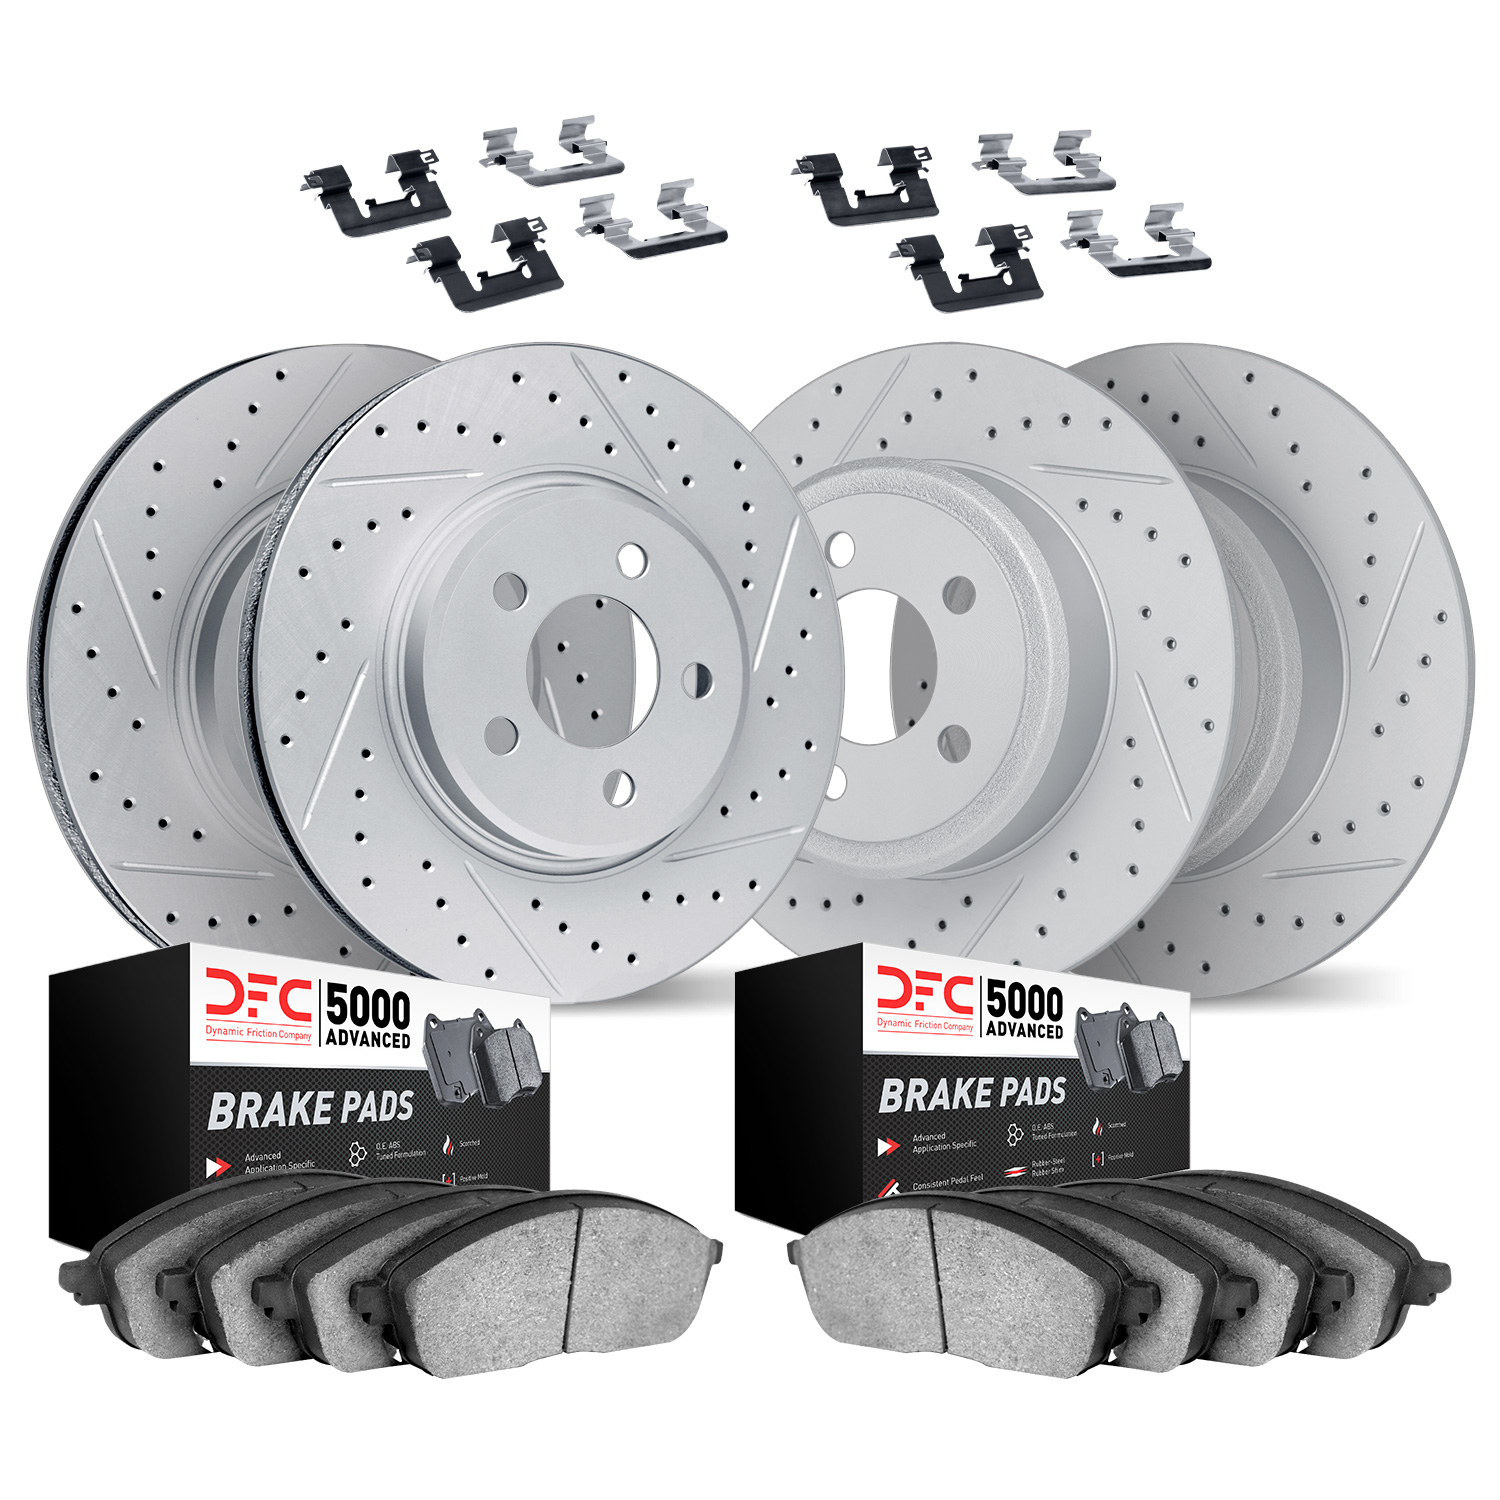 2514-47295 Geoperformance Drilled/Slotted Rotors w/5000 Advanced Brake Pads Kit & Hardware, 2004-2008 GM, Position: Front and Re